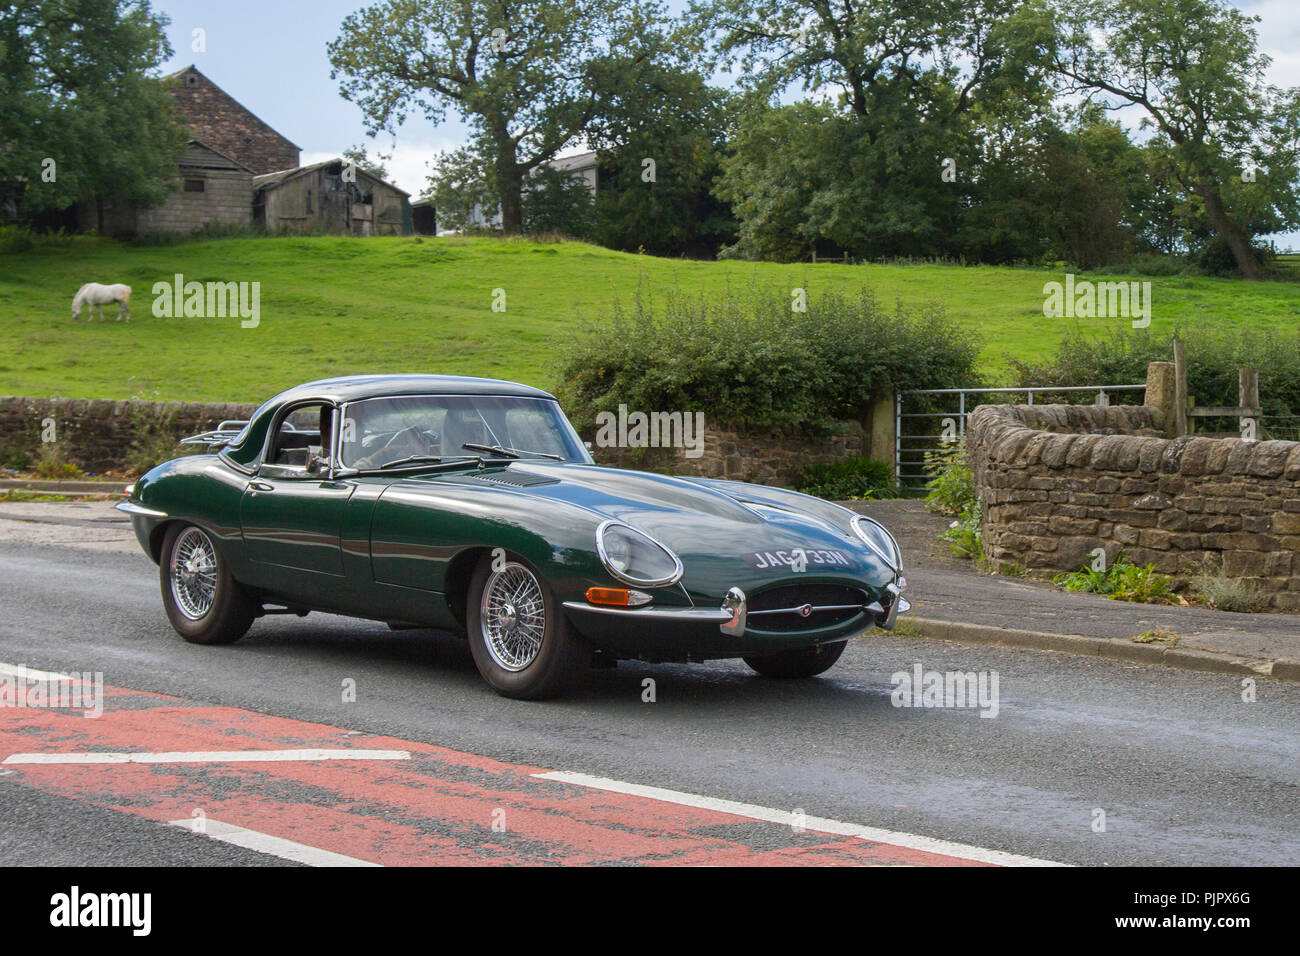 1988 90s nineties Jaguar Xj-S Auto petrol coupe ; Classic, vintage, veteran, cars of yesteryear, restored collectables at Hoghton Tower Class Cars Rally, UK Stock Photo